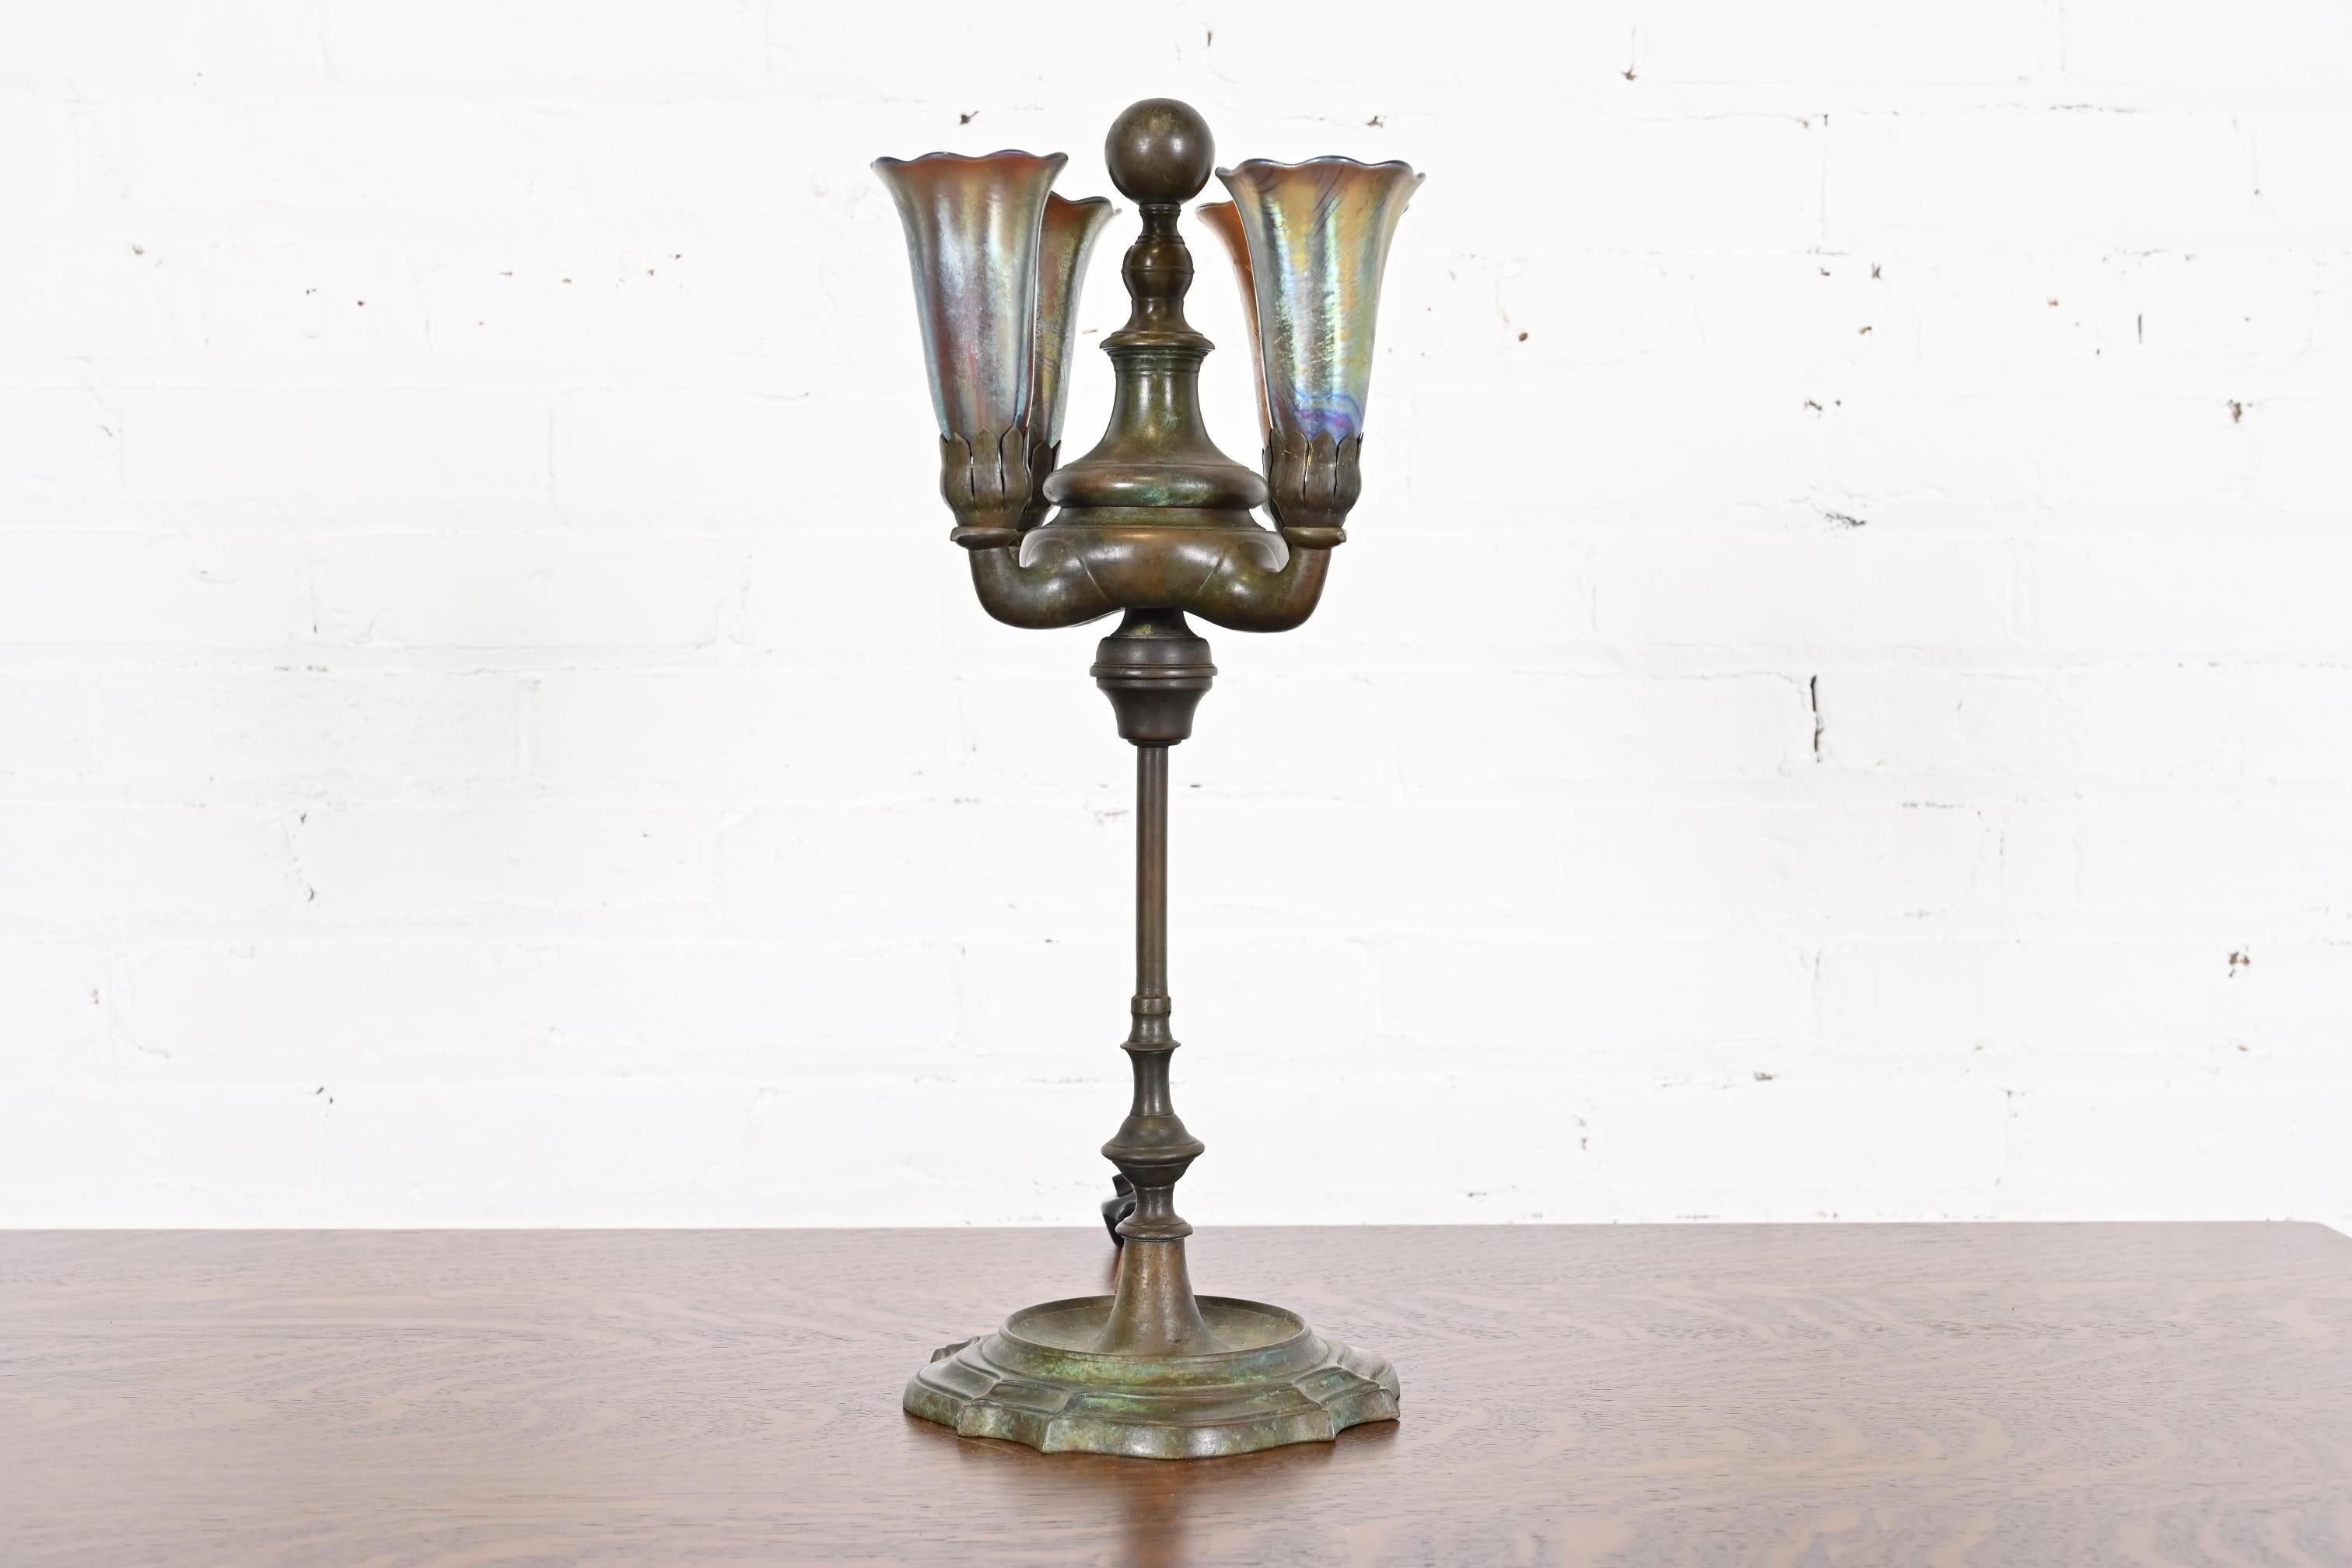 An outstanding Arts & Crafts or Art Deco period four-light table lamp

By Tiffany Studios

New York, USA, Early 20th Century

Patinated bronze, with gorgeous favrile glass shades.

Measures: 7